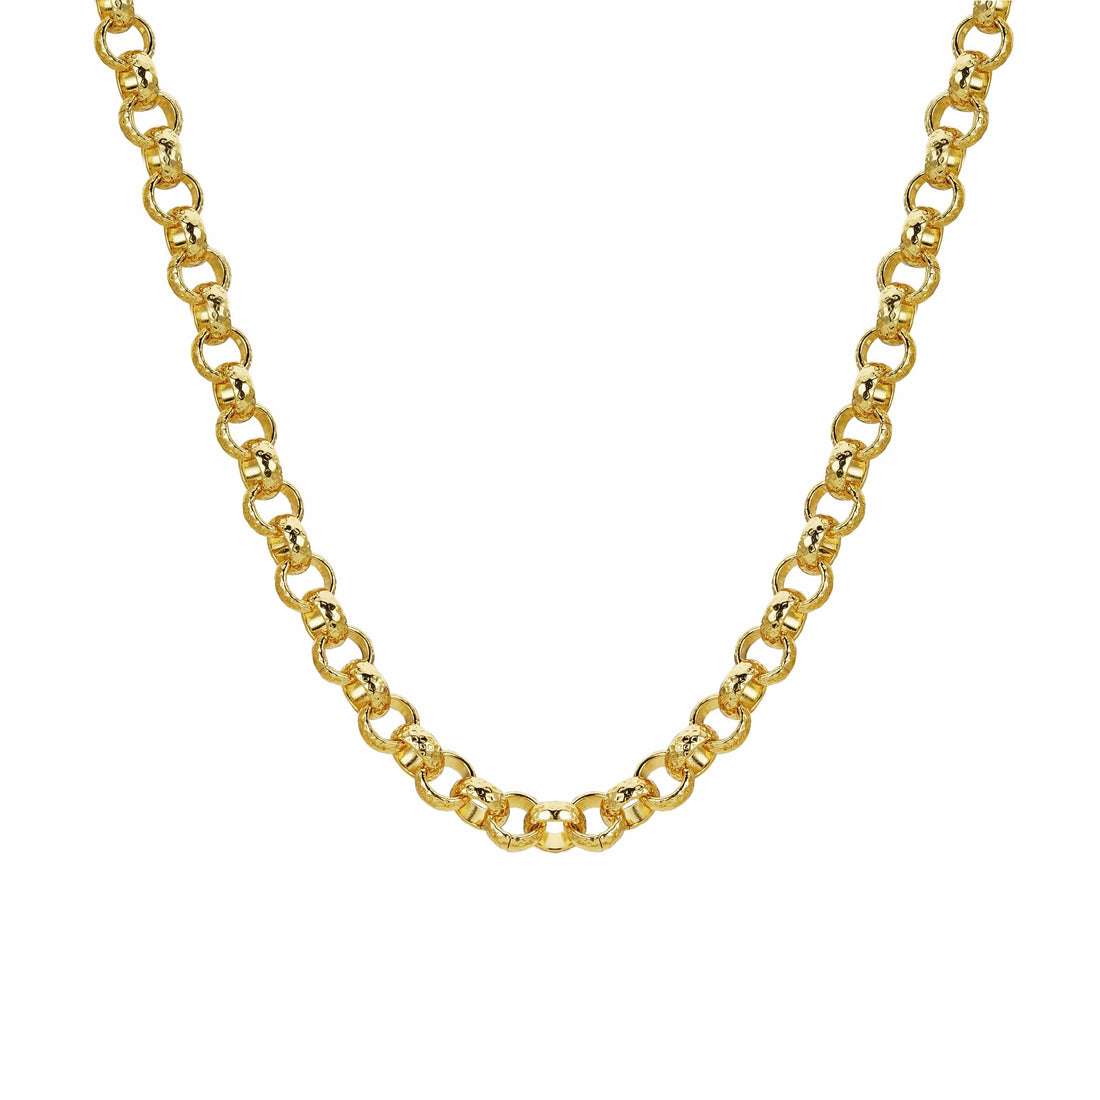 Gold Dipped Chains Patterned Belcher Chain 8mm - Gold